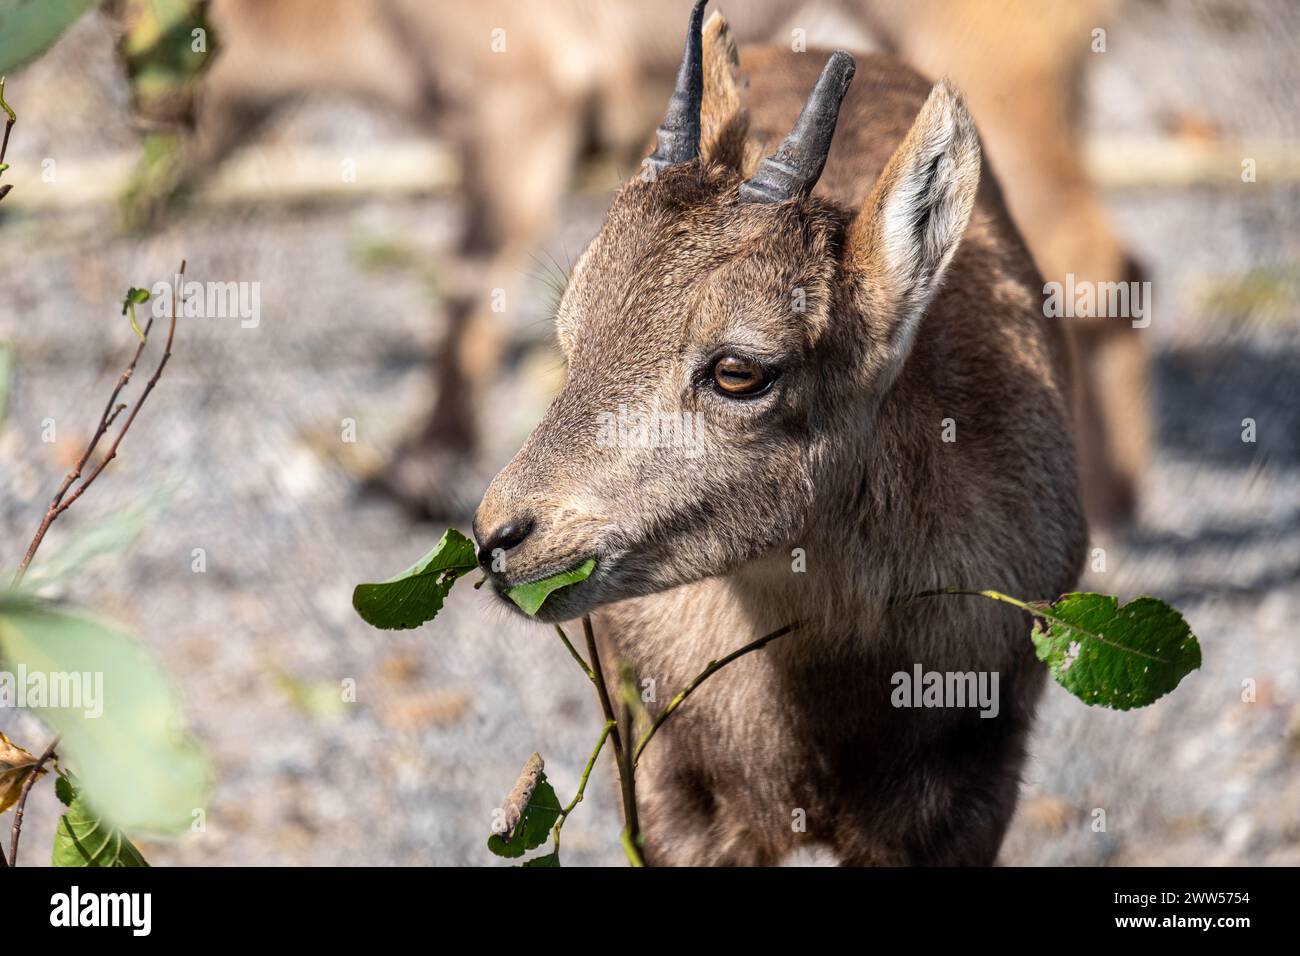 Juvenile ibex nibbling on green leaves, a tender moment in wildlife captured with detail against a natural rocky background. High Stock Photo